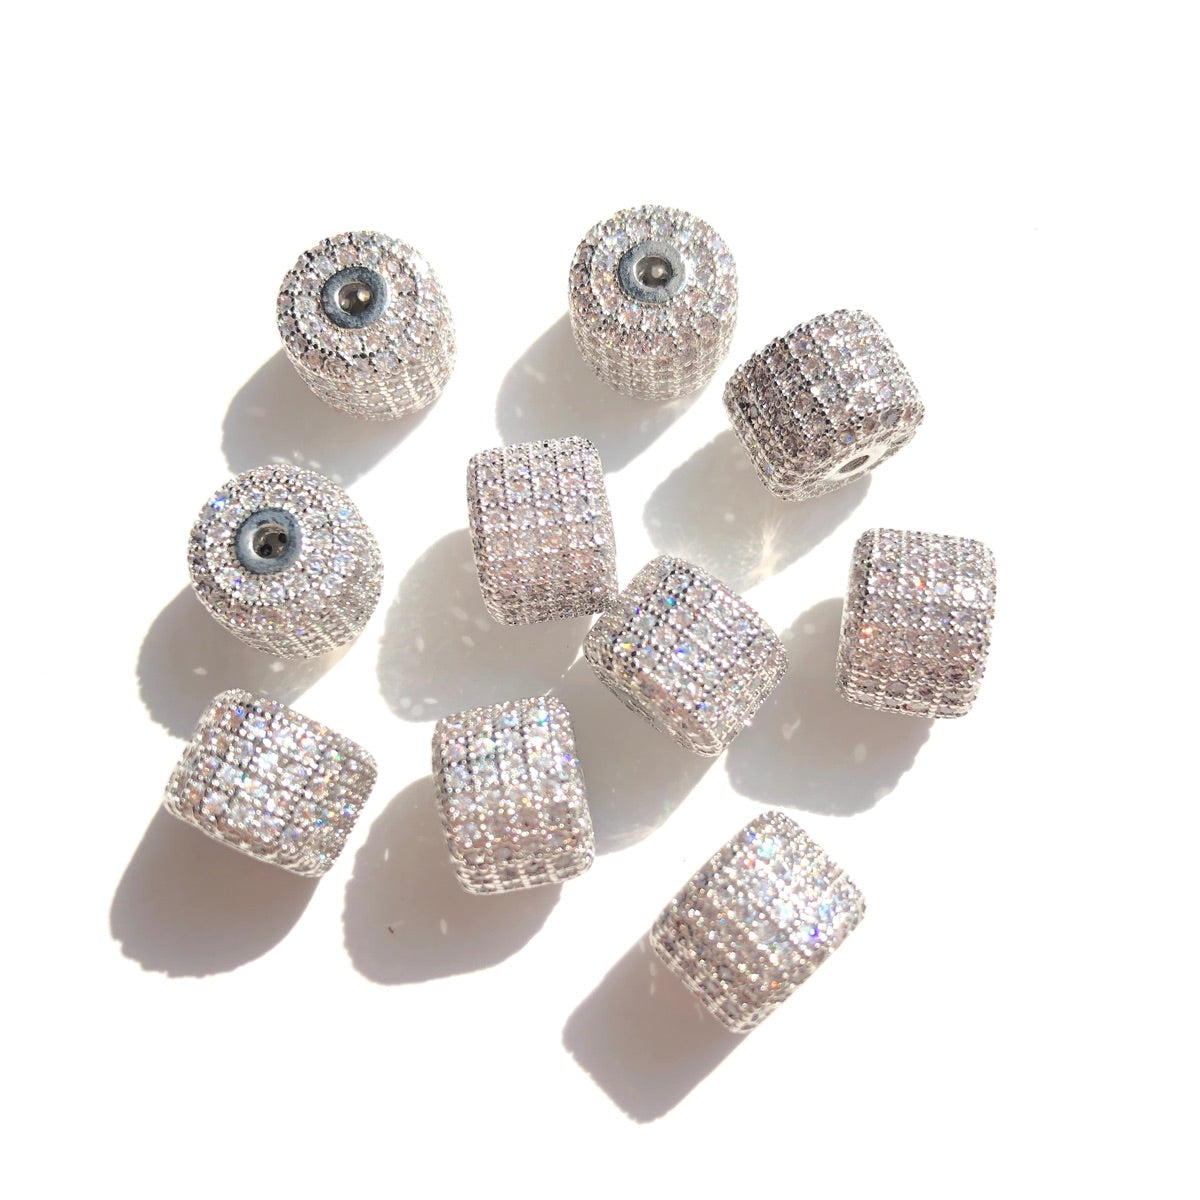 10 PCS Wheel Spacer Beads - S925 Sterling Silver WSP373X10